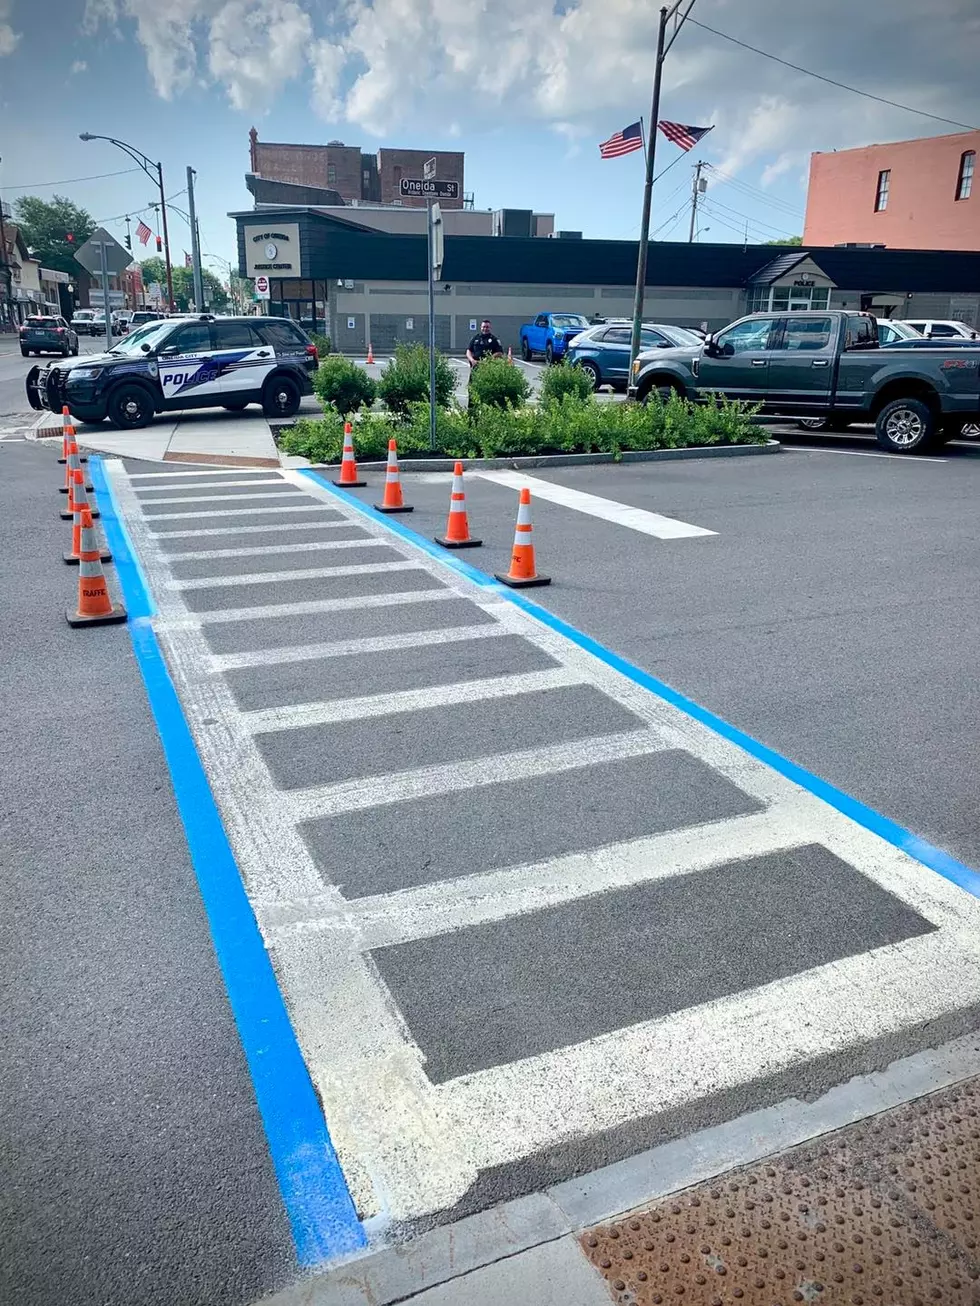 Blue Lines Linking Oneida Police Department, City Hall Repainted